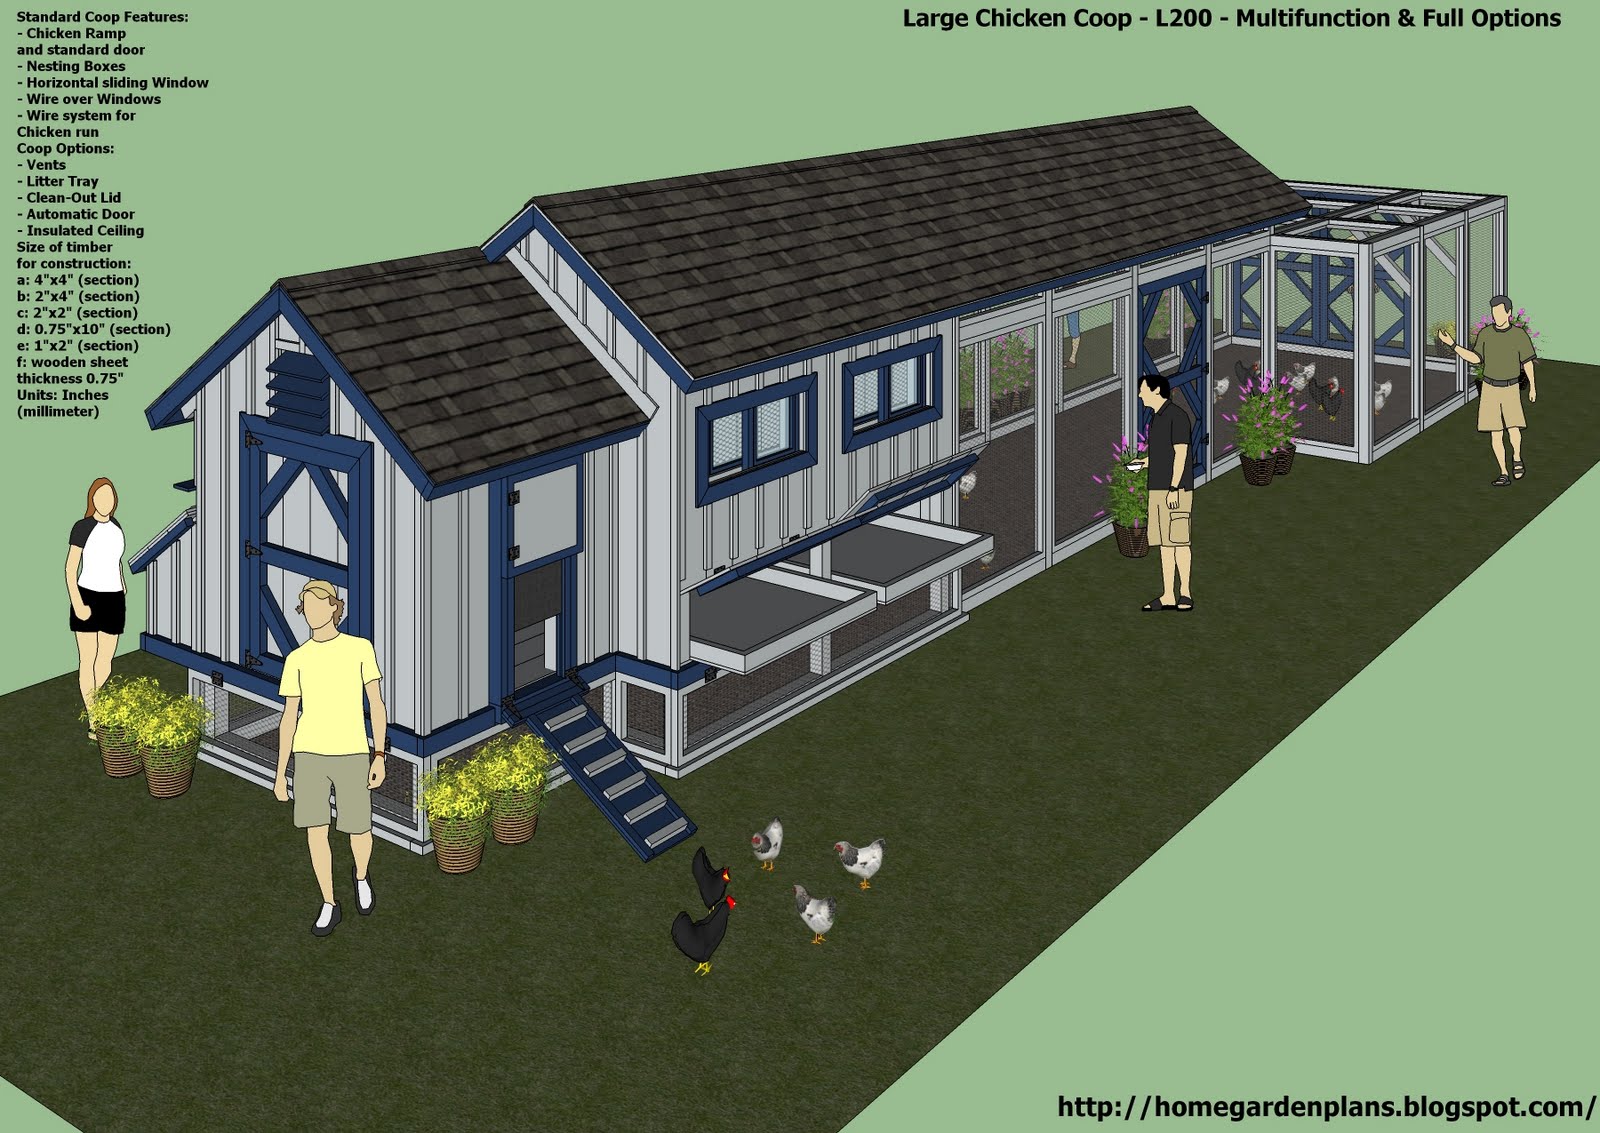 News - L200 - Large Chicken Coop Plans - How to Build a Chicken Coop 